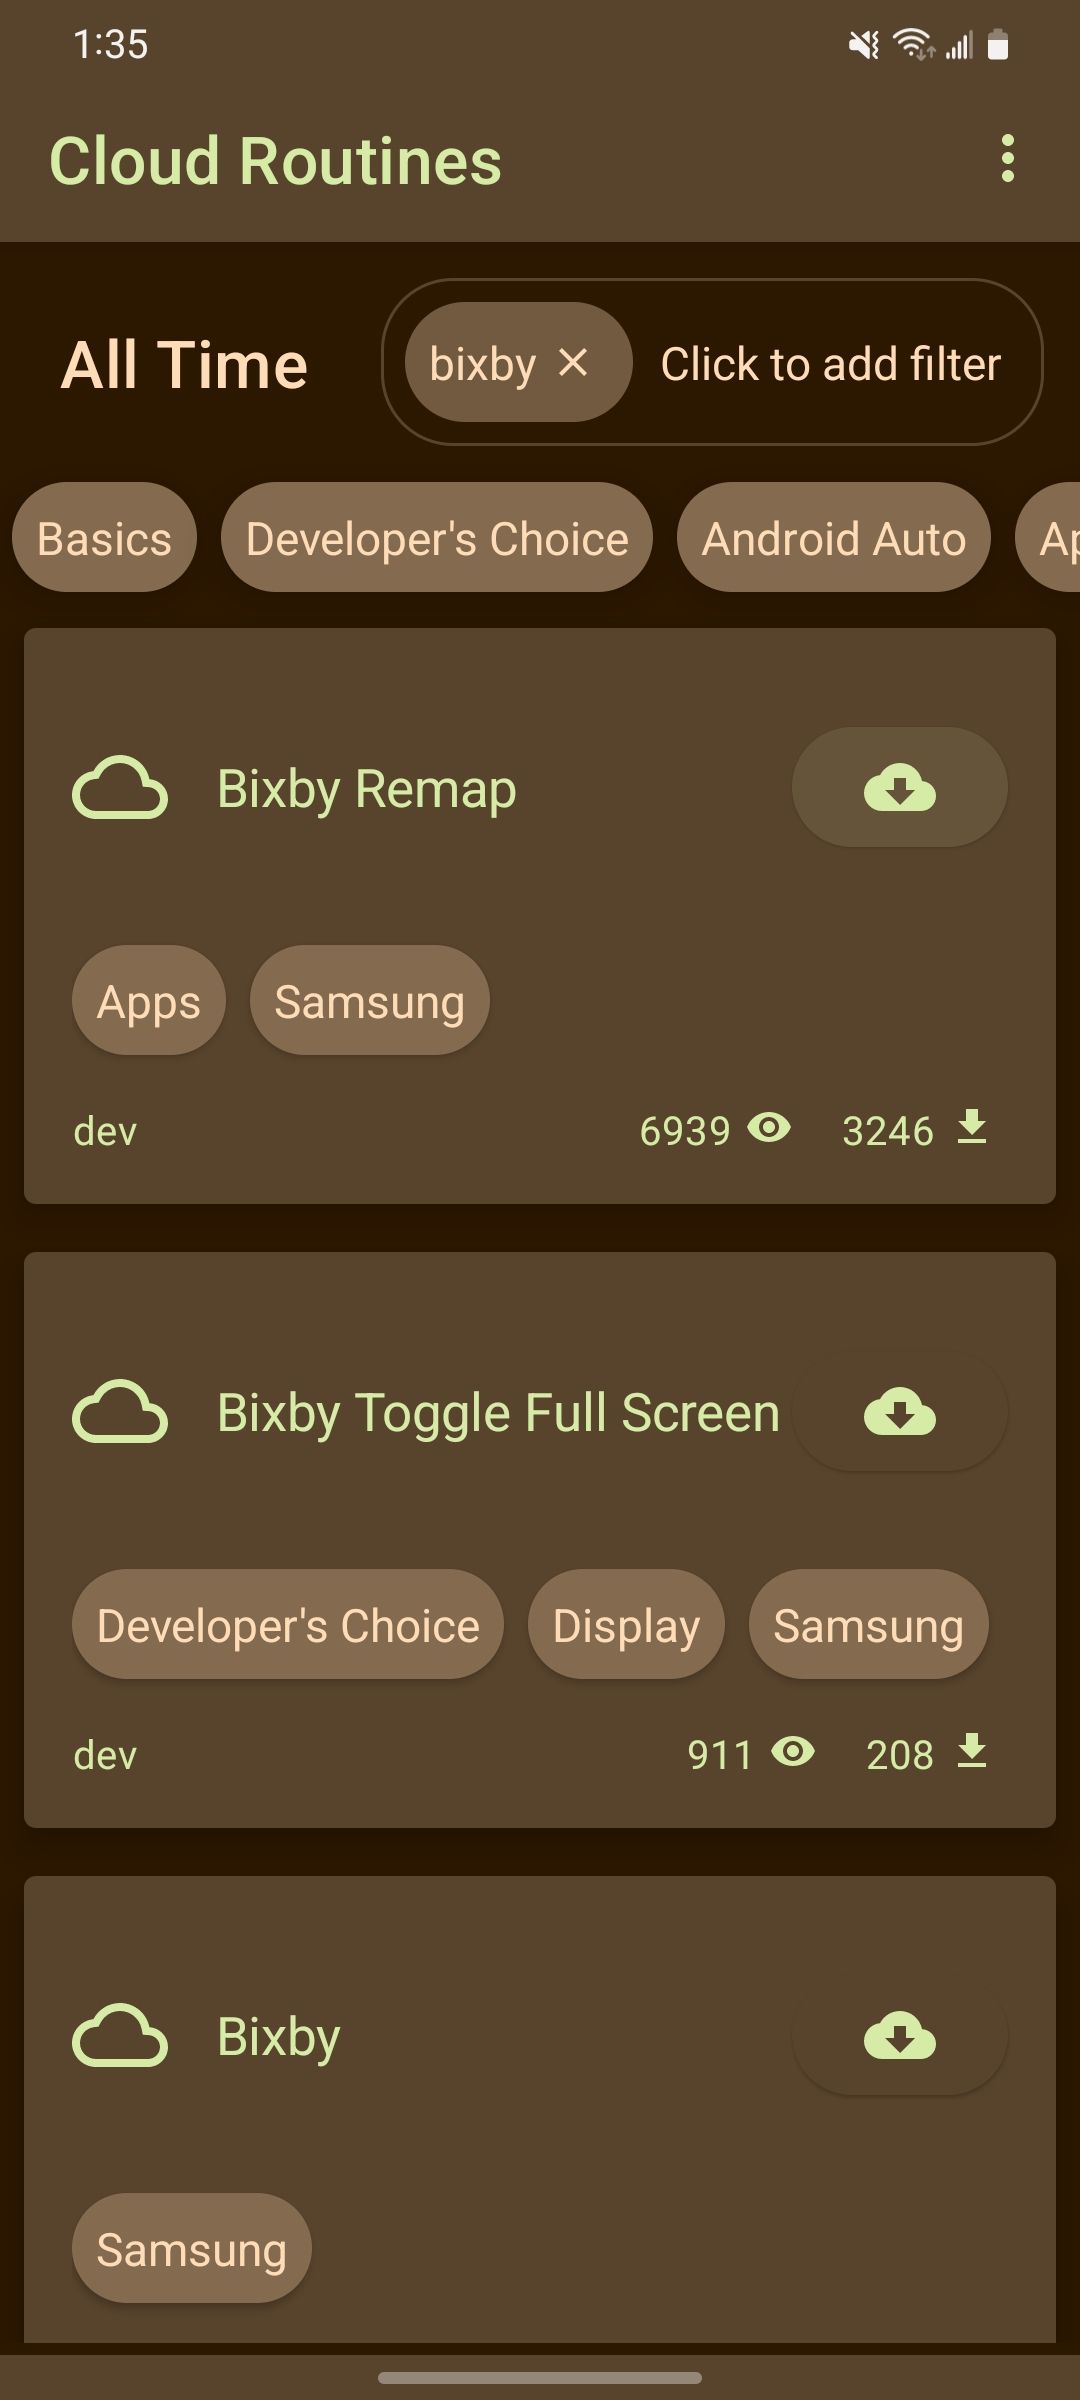 Searching for and getting ready to download the Bixby Remap routine in the Tasker app